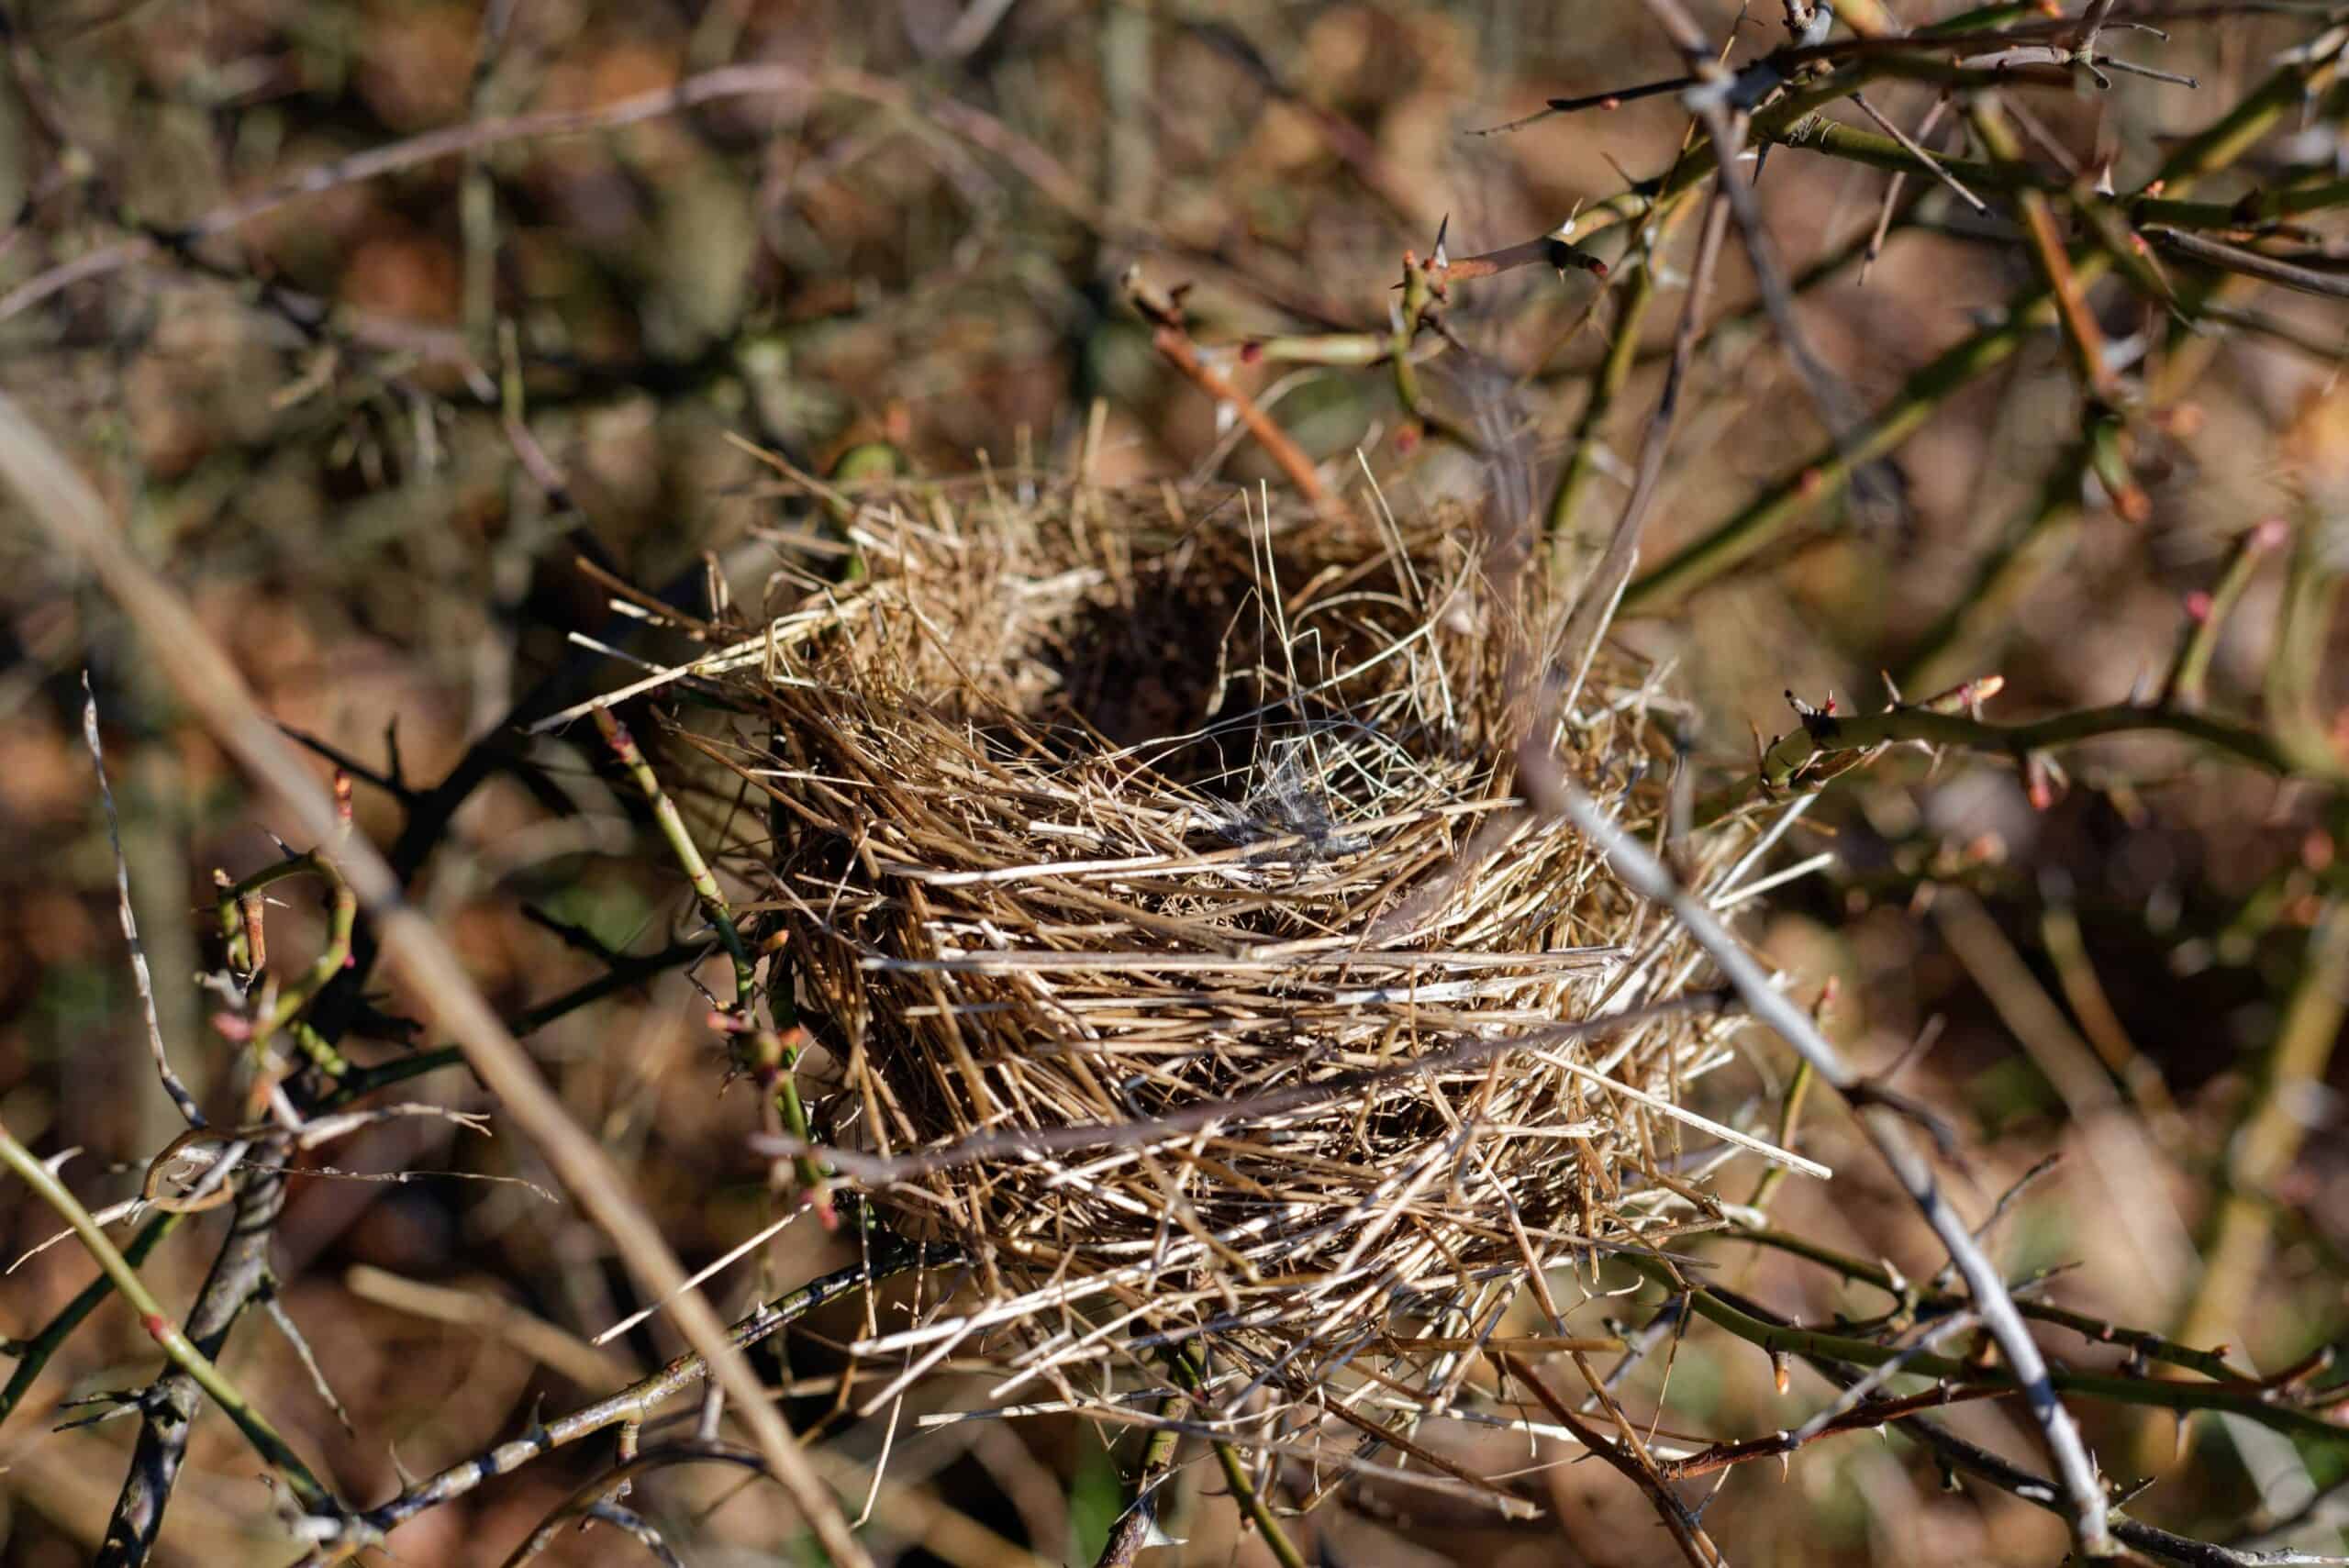 How To Tell If A Mother Bird Has Abandoned Her Nest?